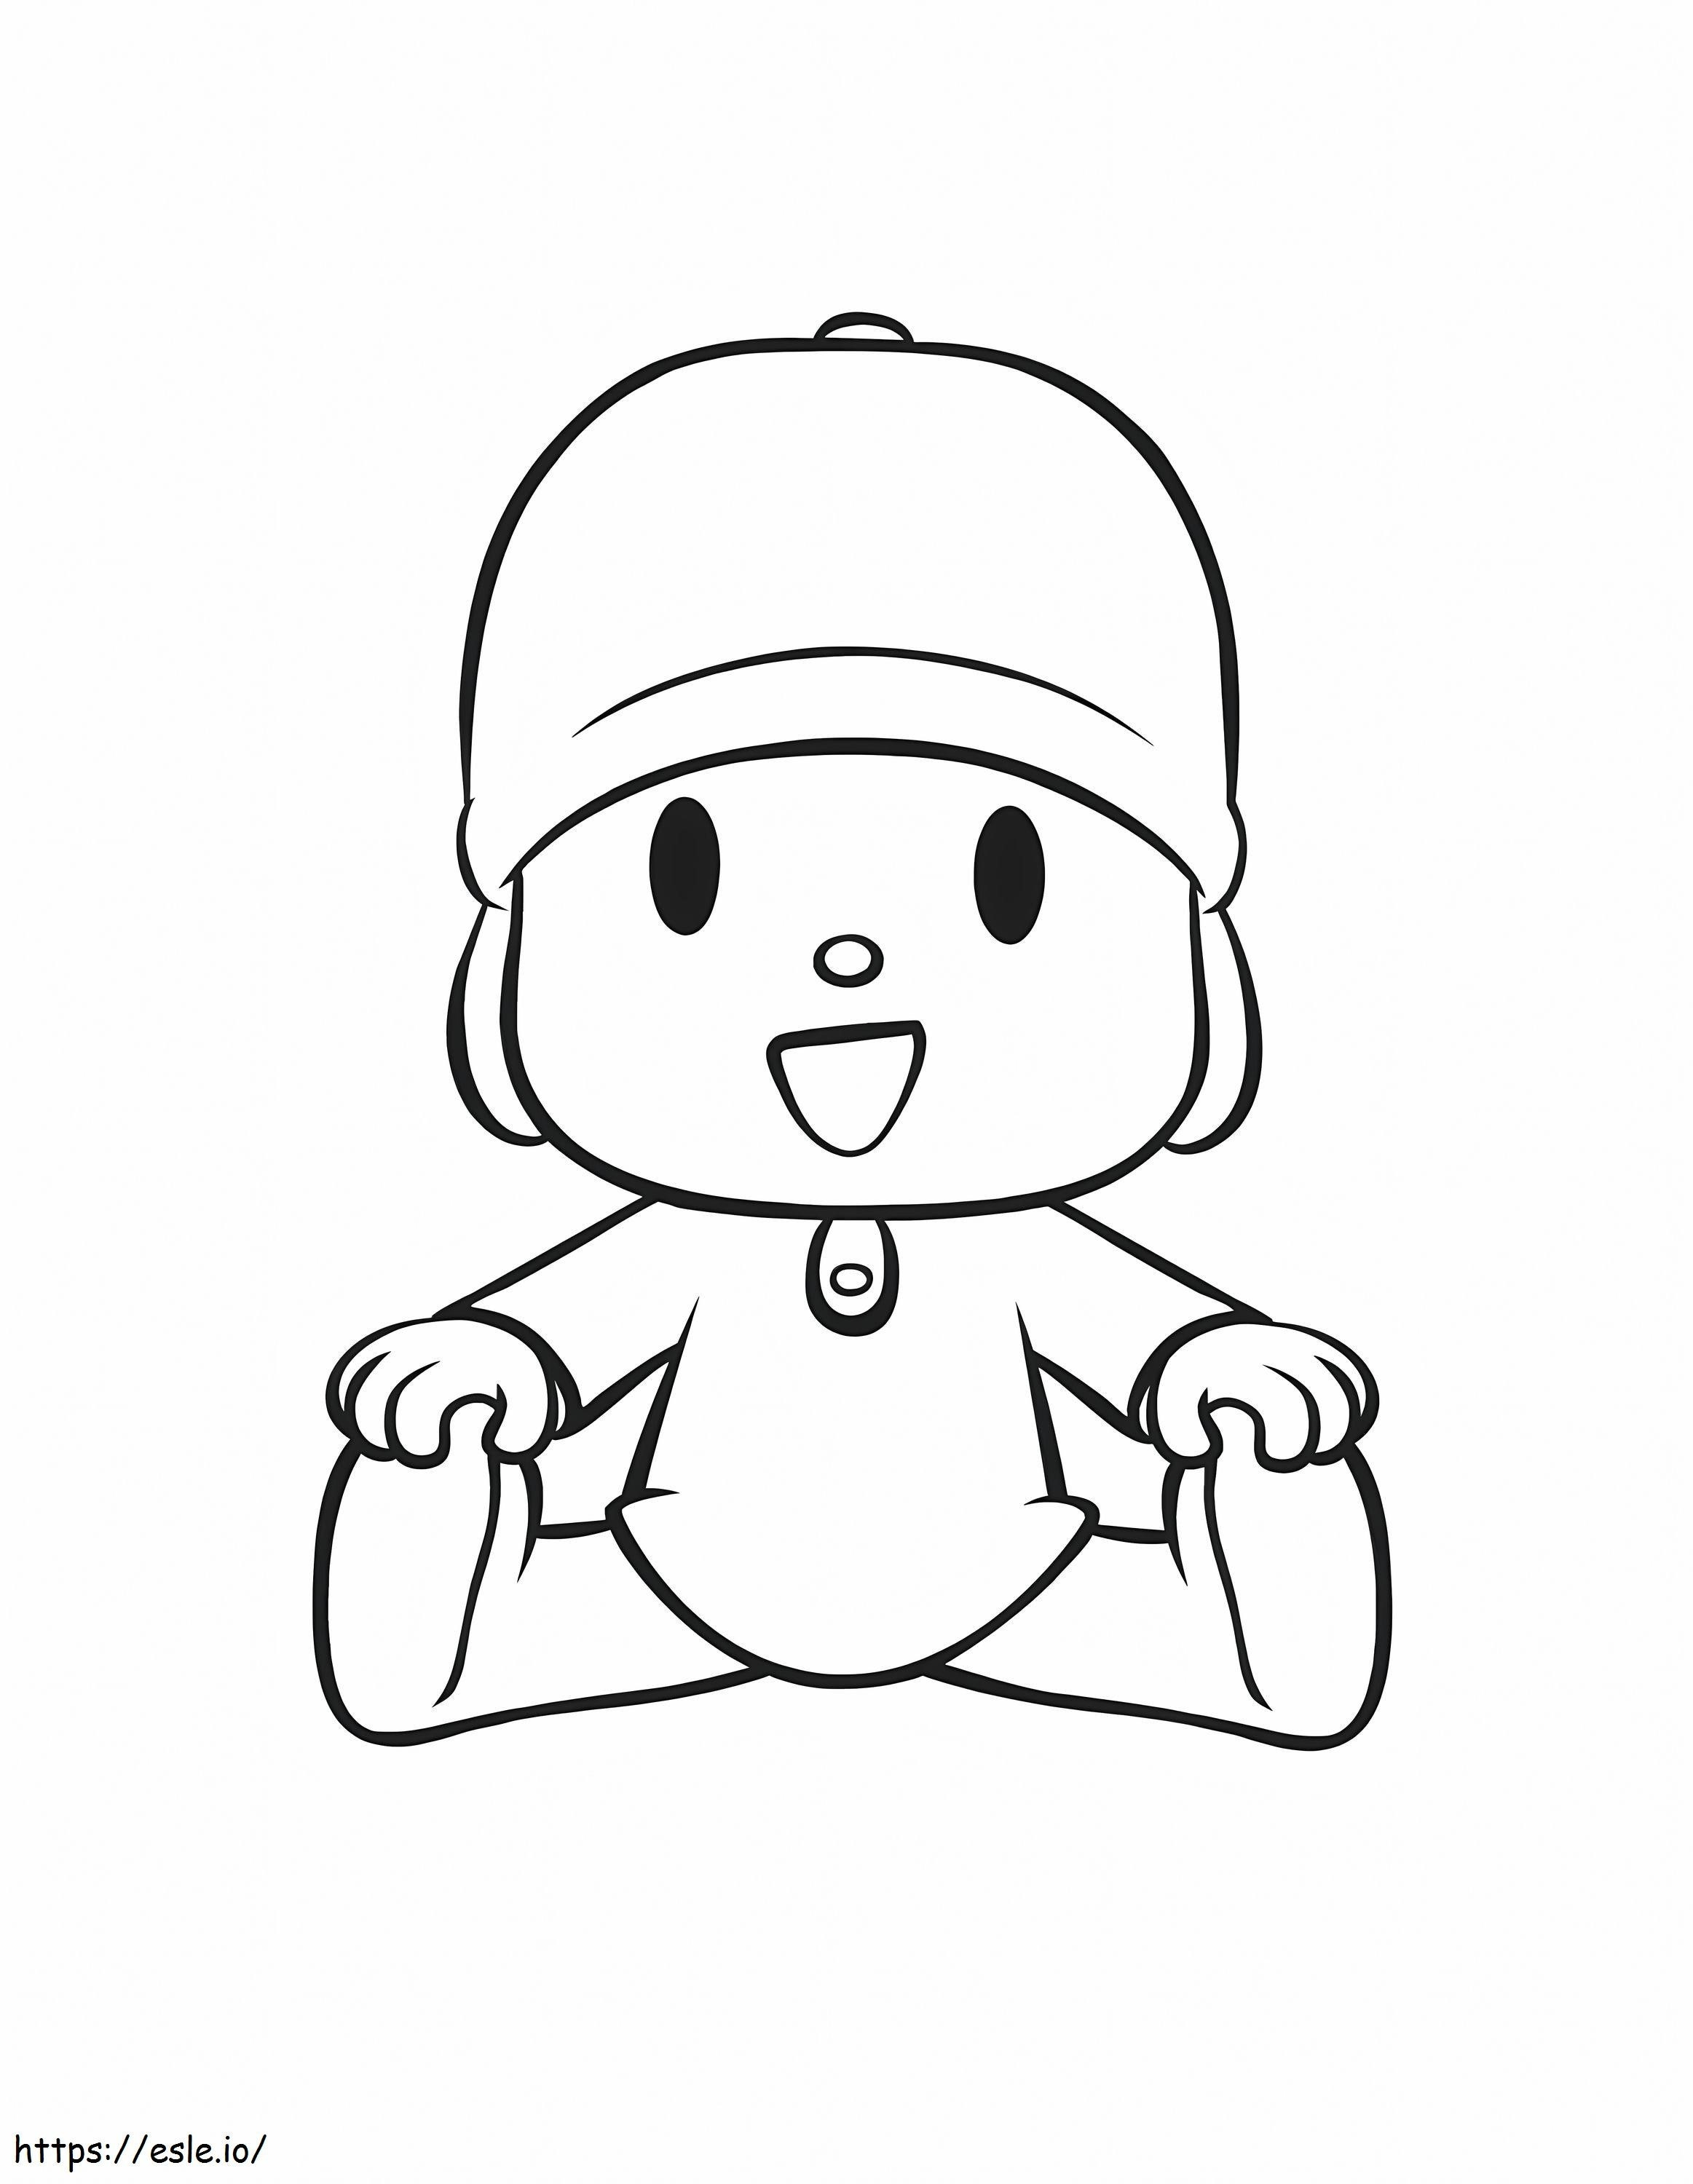 Funny Pocoyo Sitting coloring page